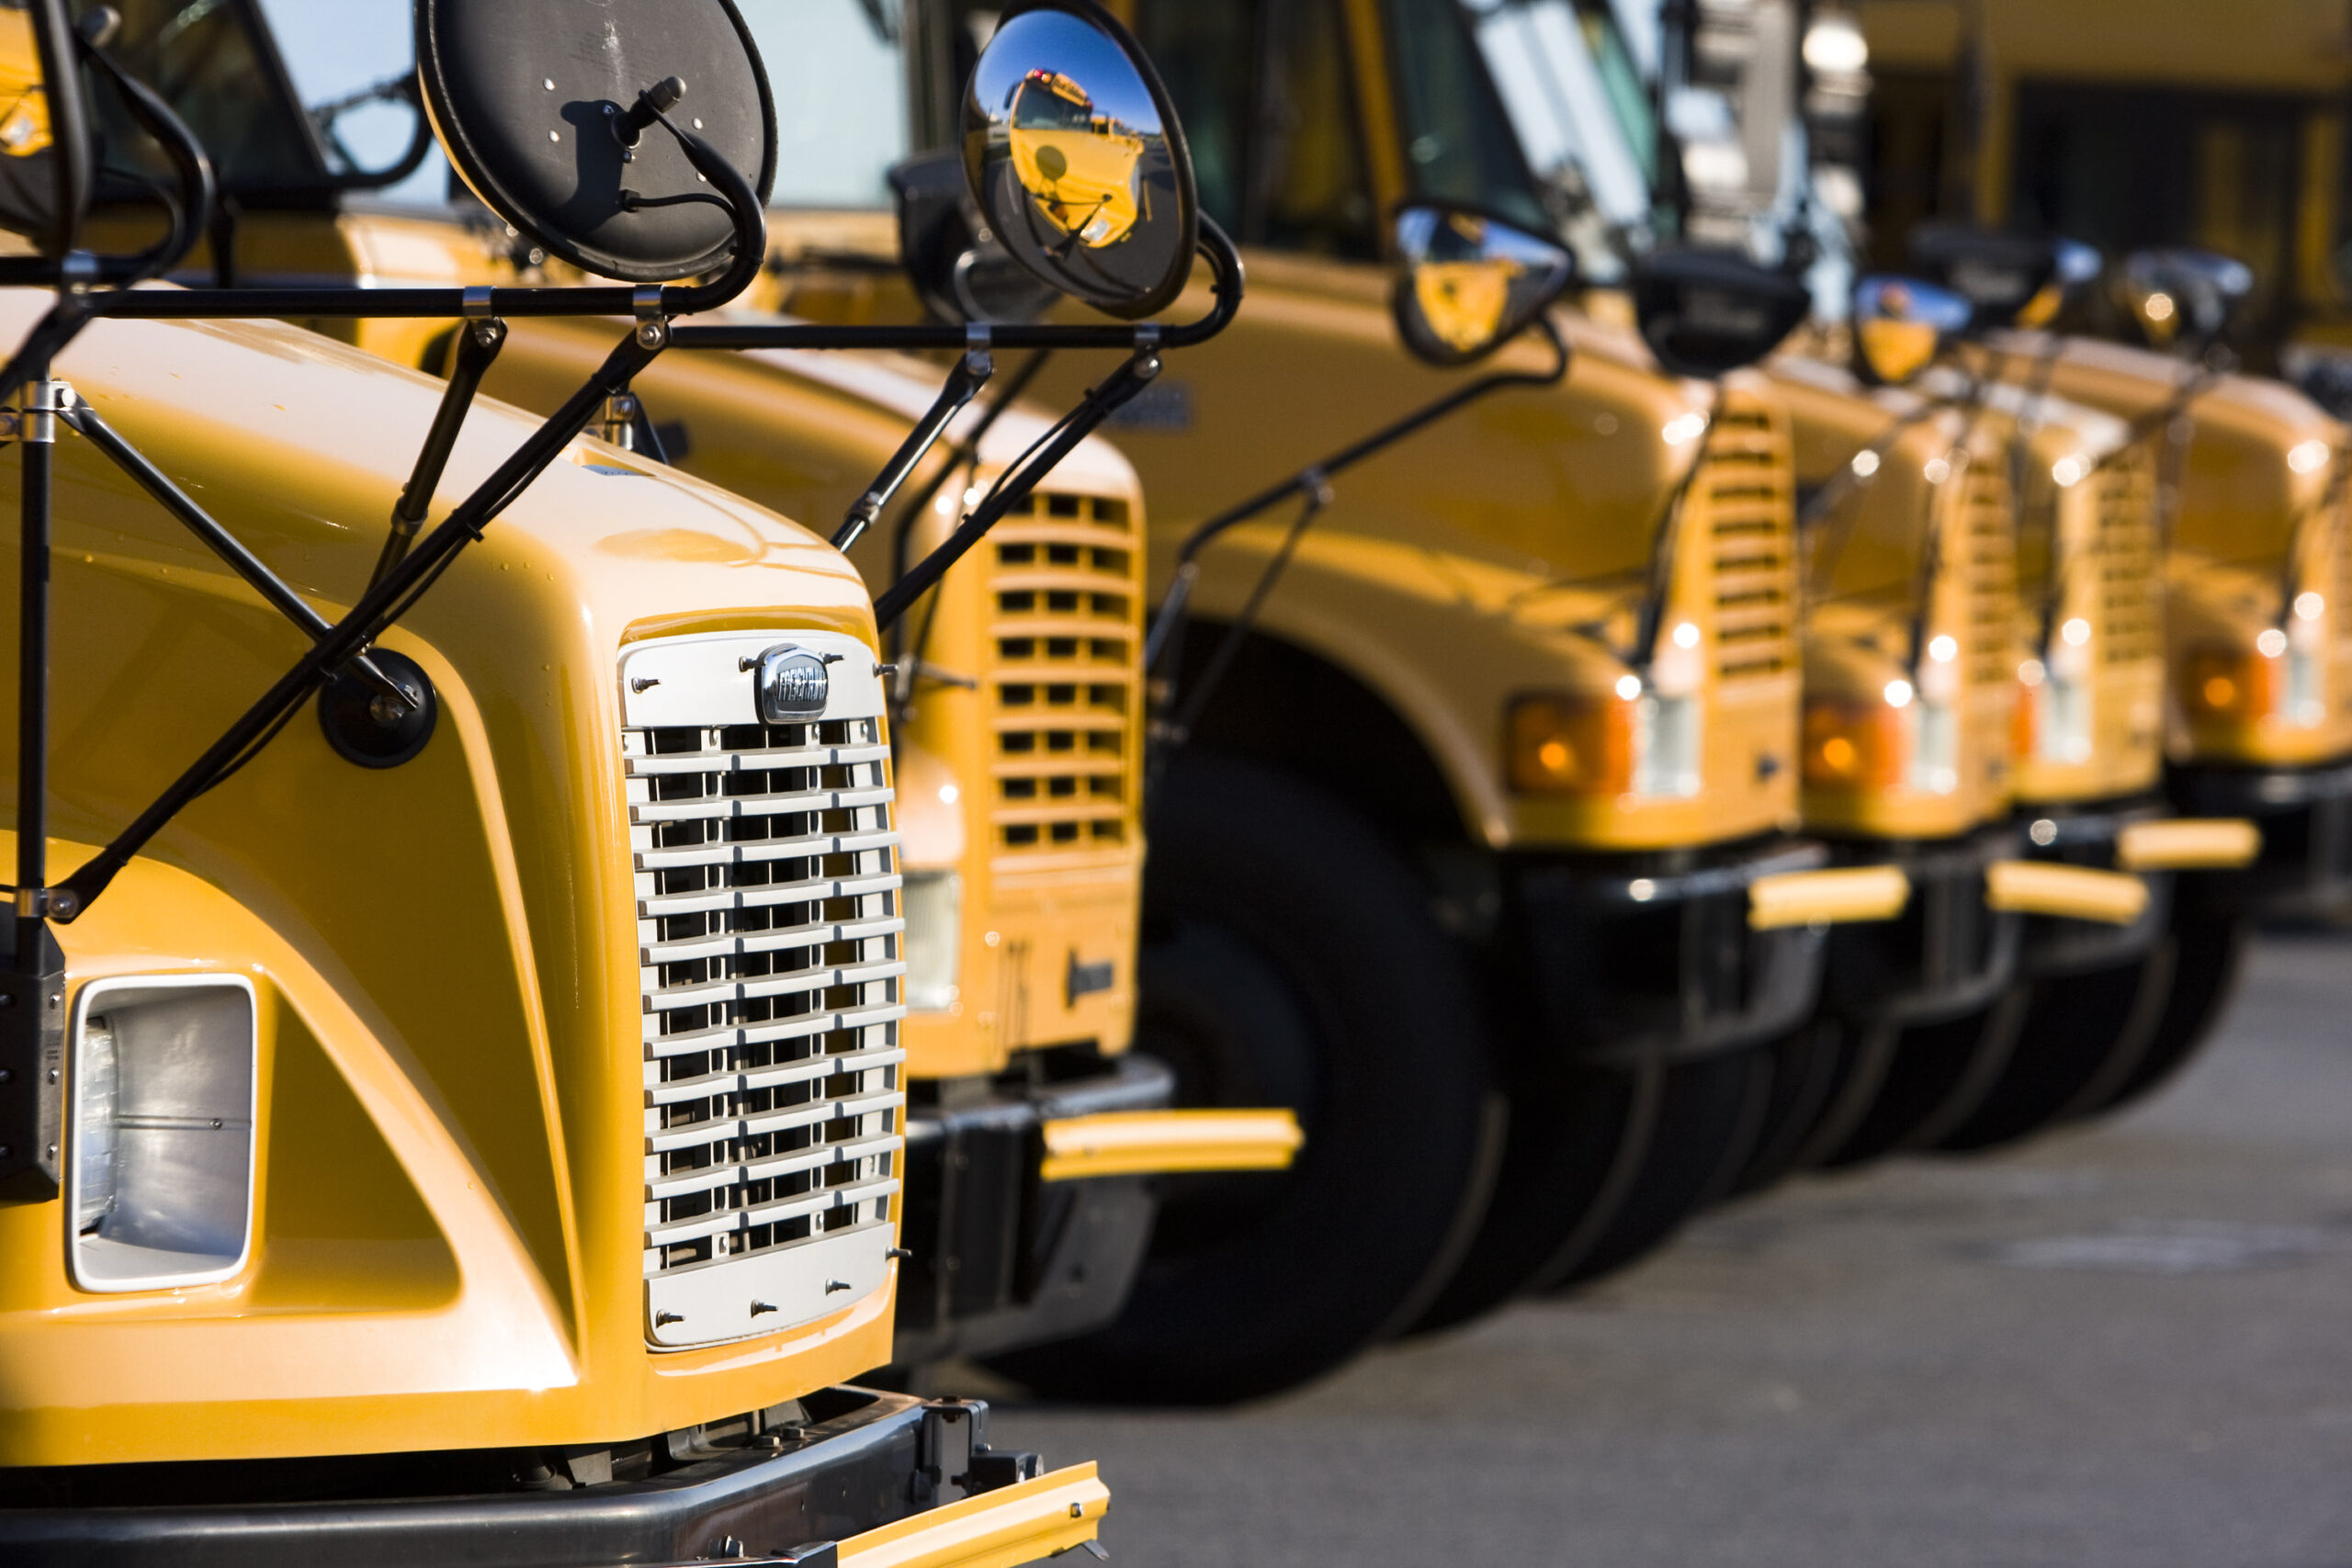 School buses prepare for another school year